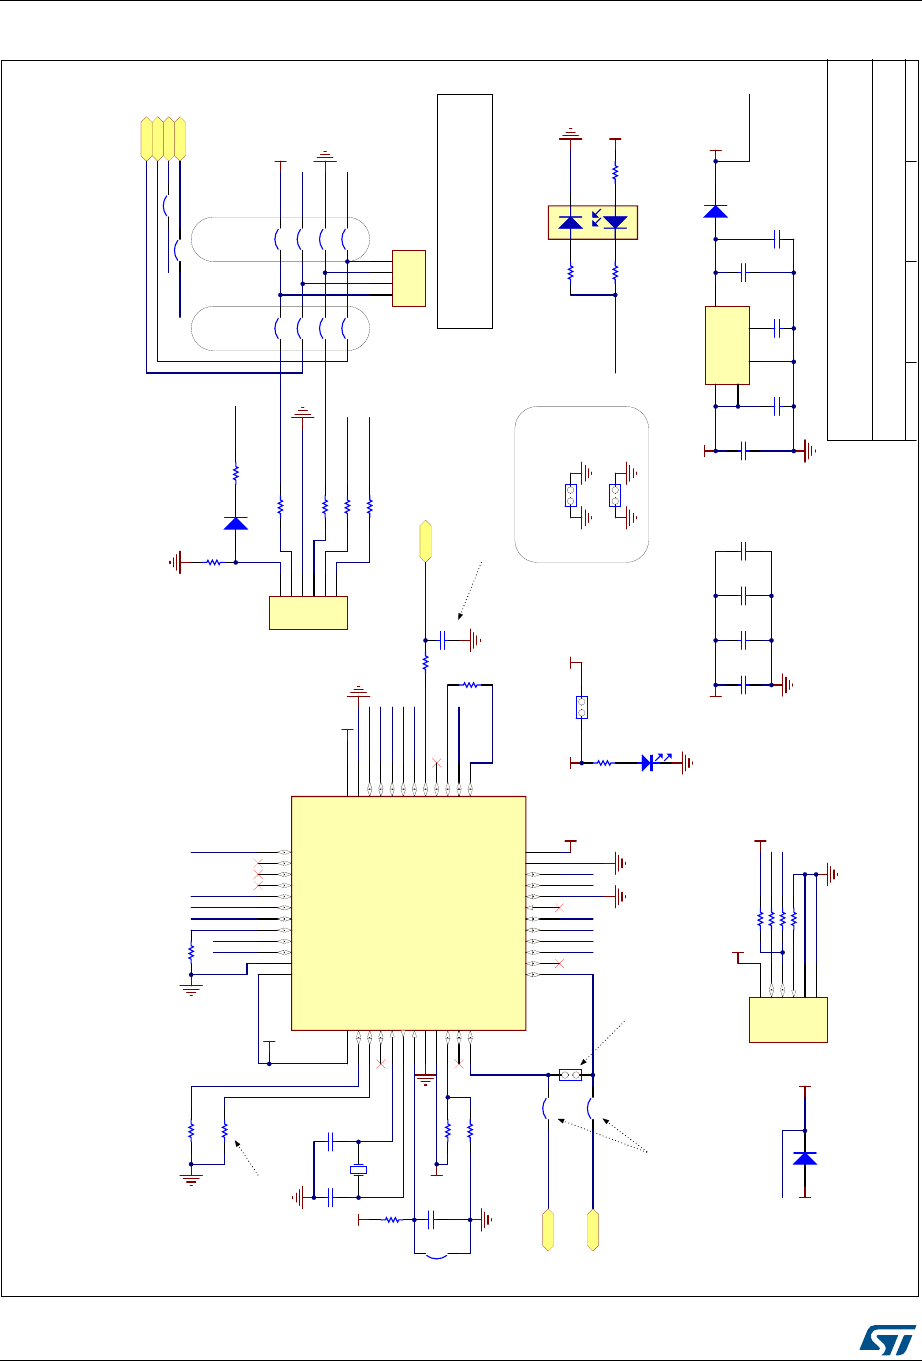 44++ Stm32f429 discovery schematic information